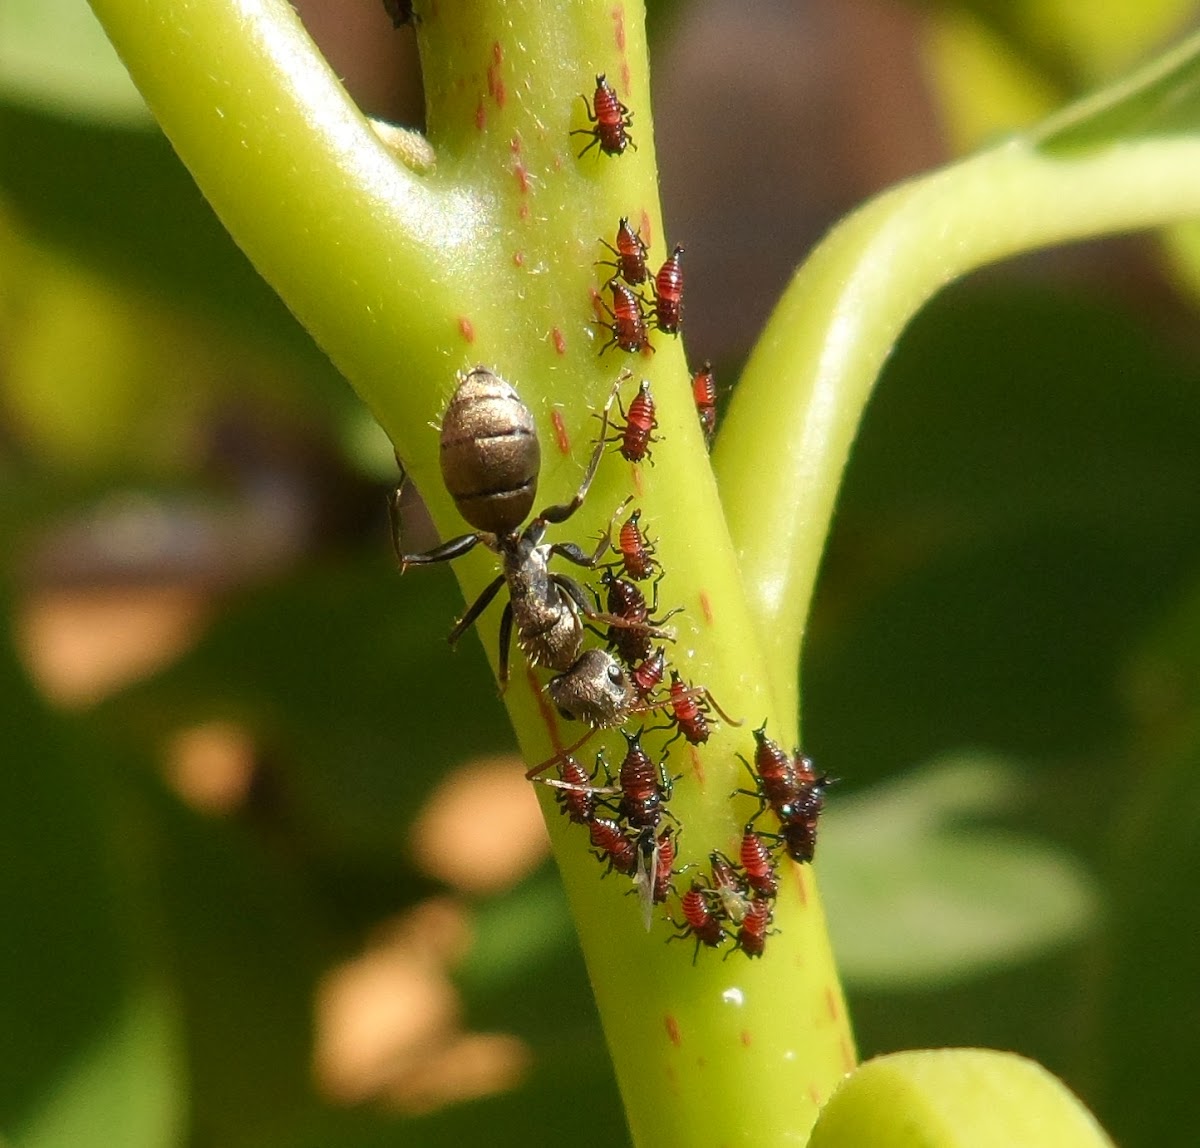 The treehopper nymphs tended by an ant